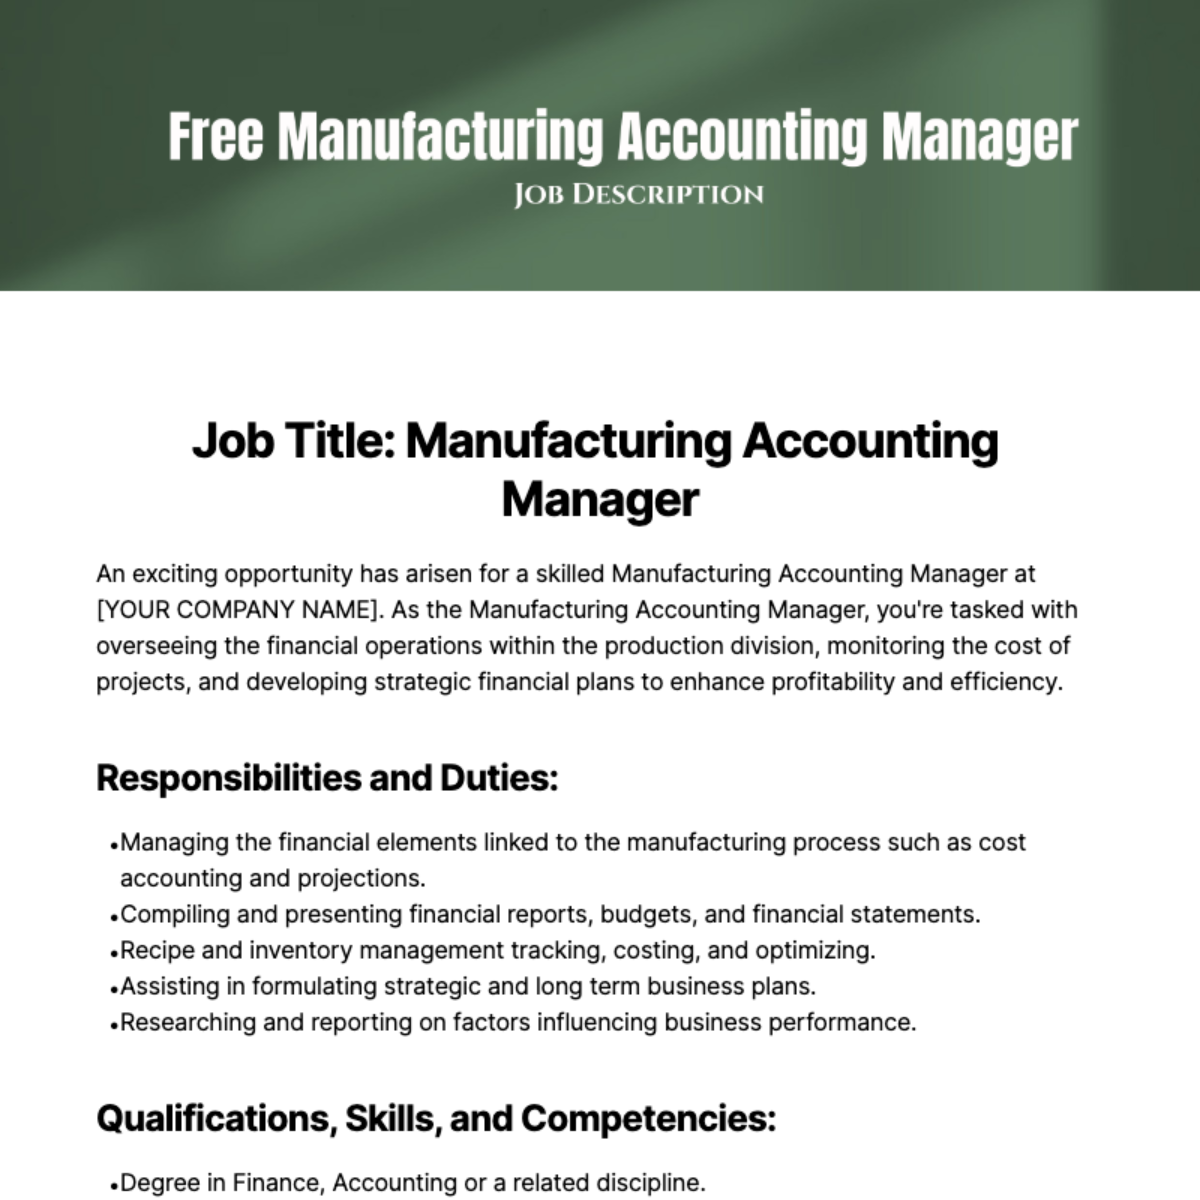 Manufacturing Accounting Manager Job Description Template